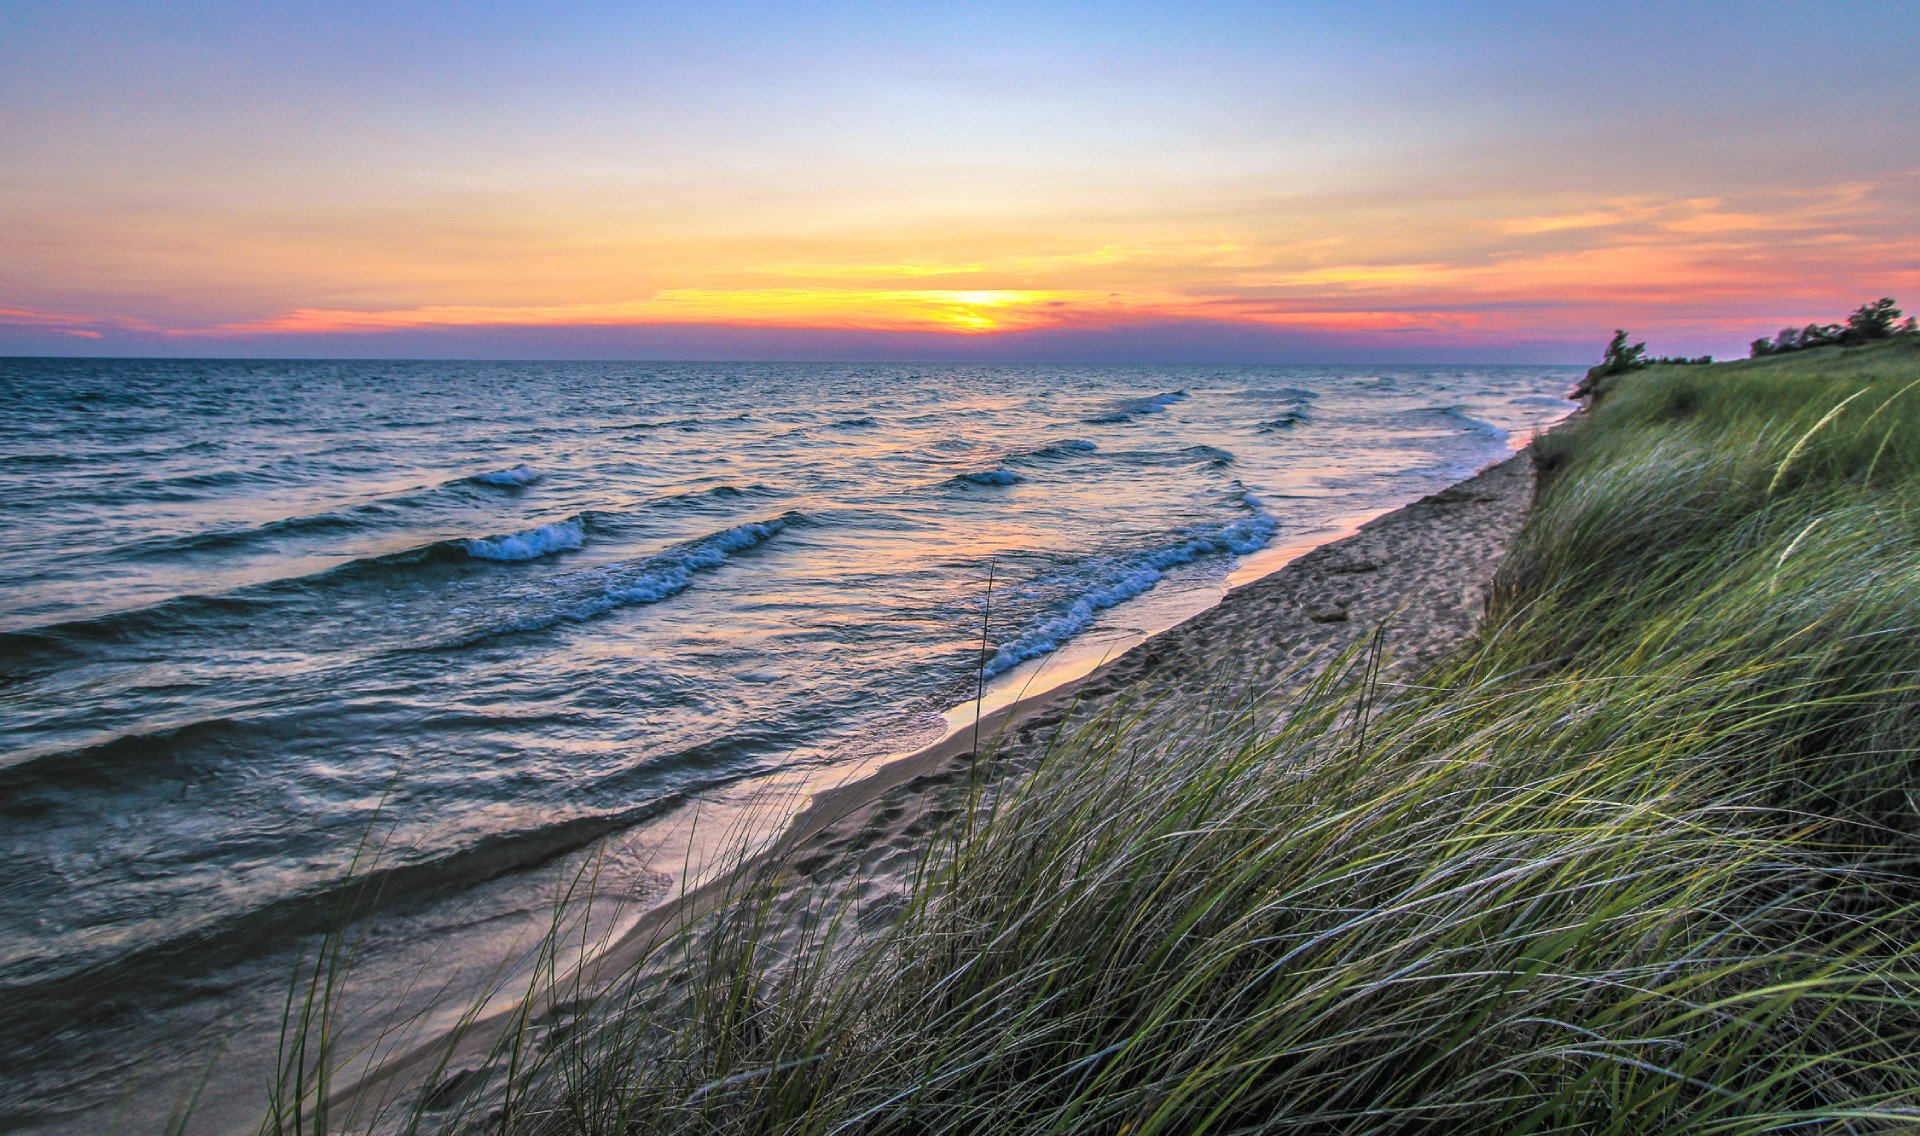 Sunset landscape as waves roll in on the beautiful coast of Lake Michigan at Hoffmaster State Park near Muskegon.